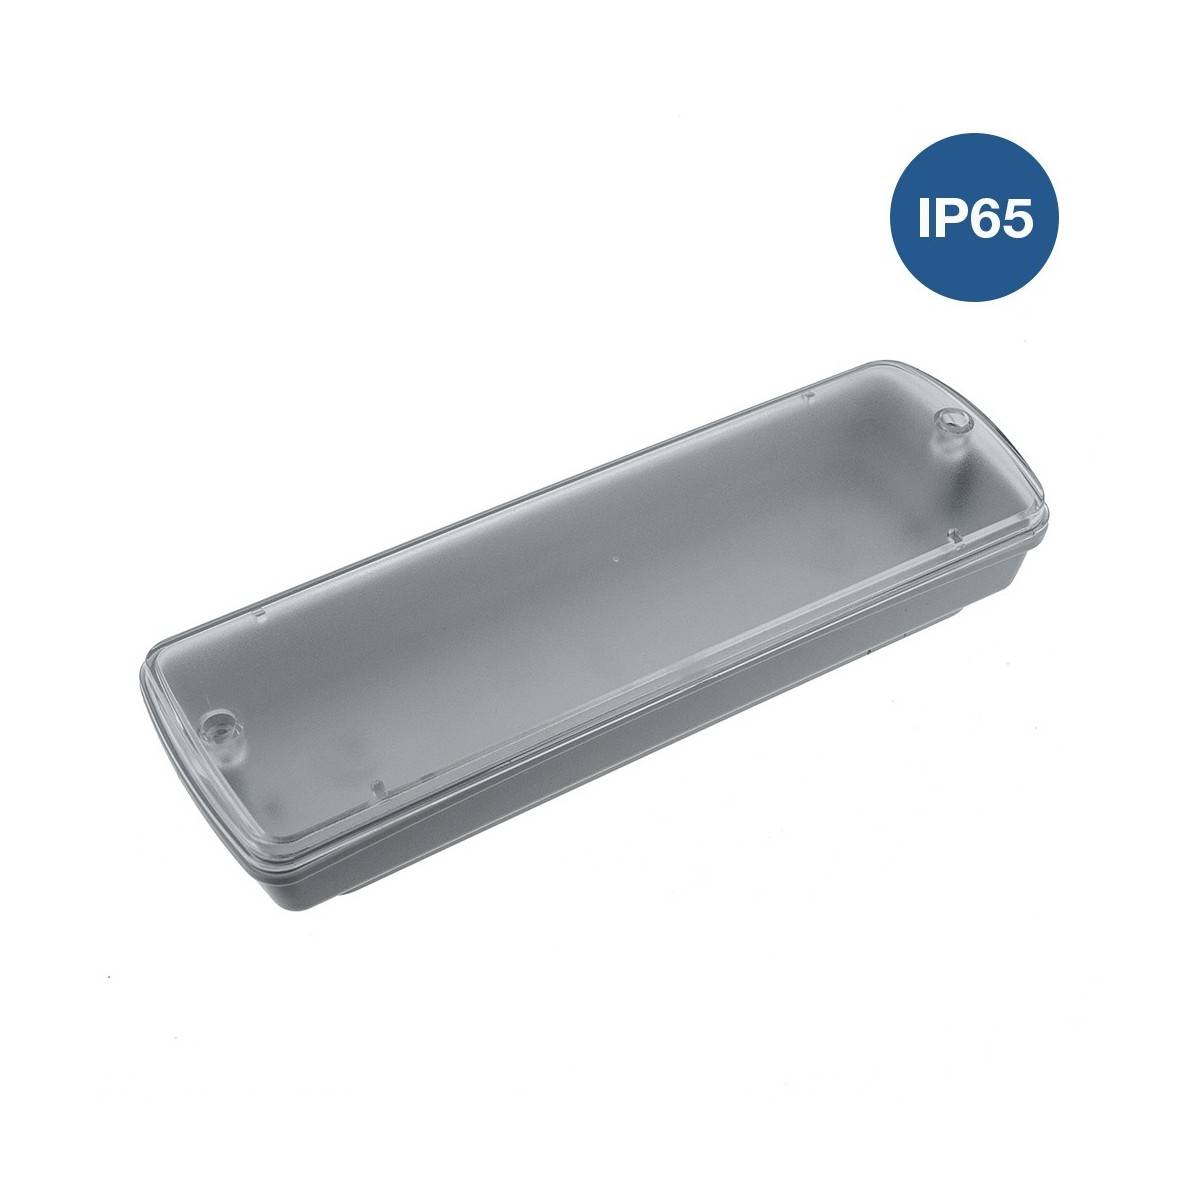 Surface-mounted weatherproof box for emergency light - IP65